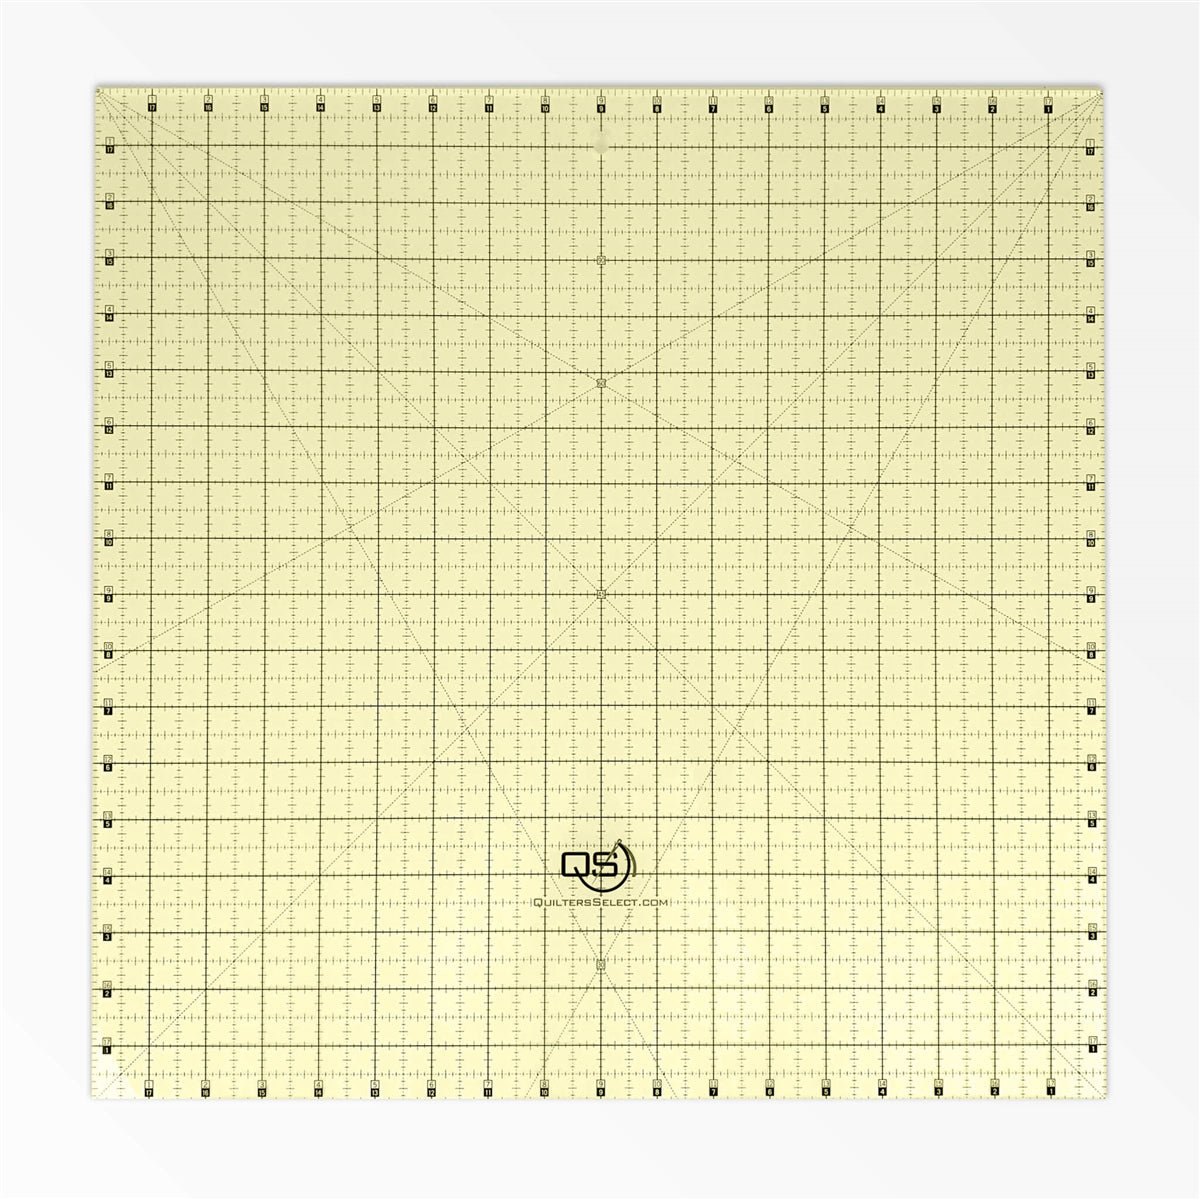 Quilter's Select Non-Slip Rulers Ruler - Trapunto edmonton local fabric store shop